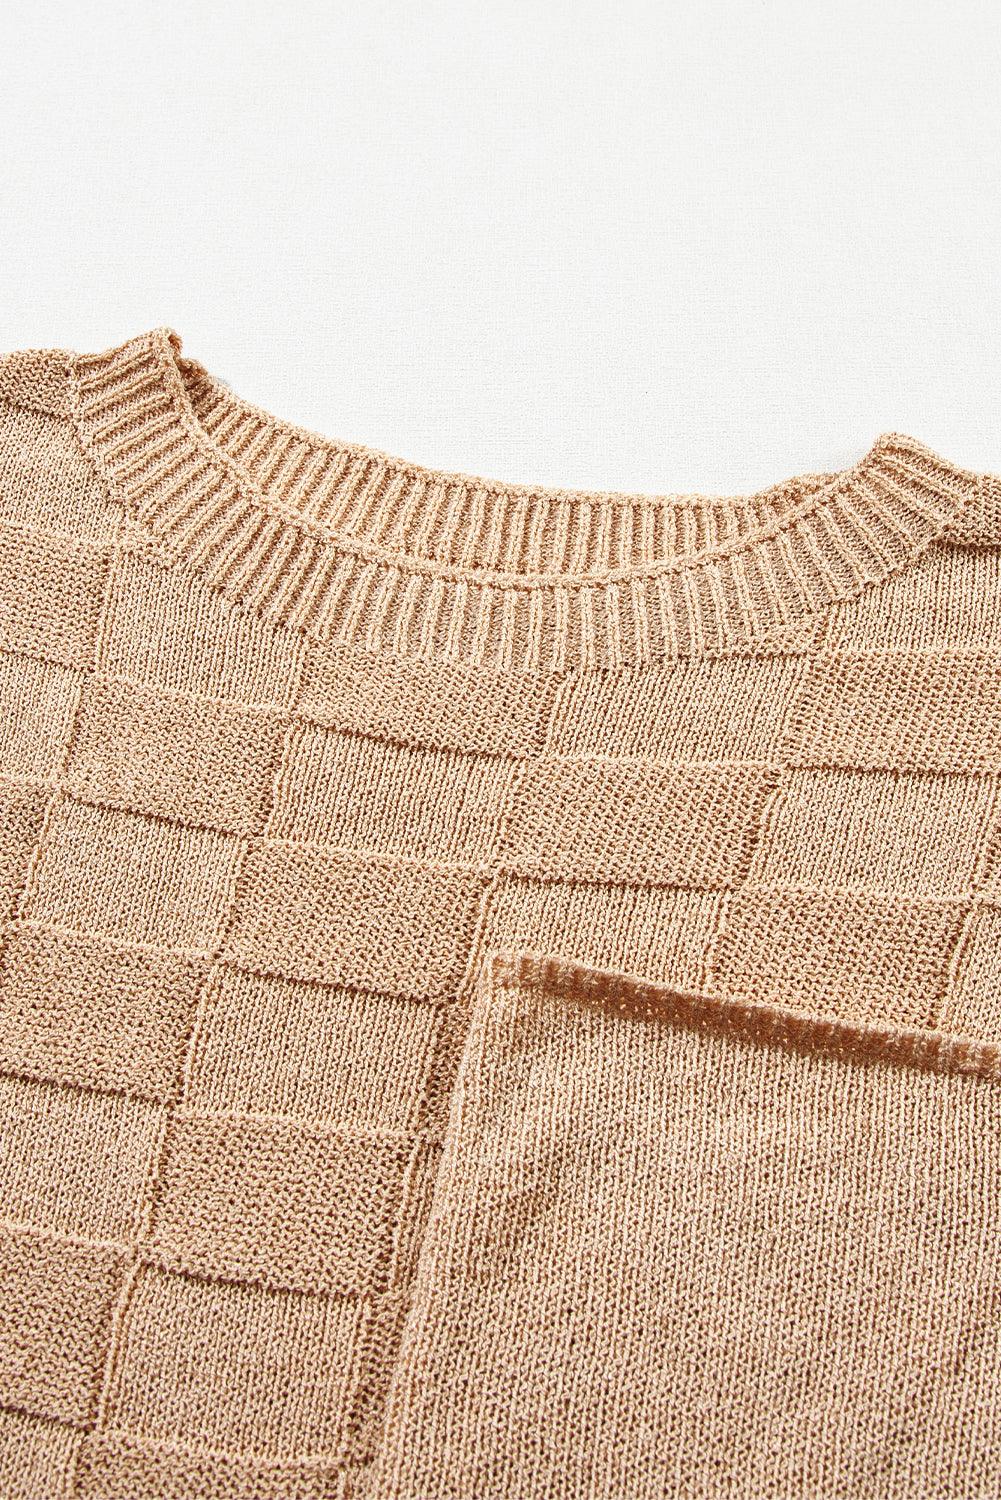 Checkers Textured Knit Short Sleeve Sweater